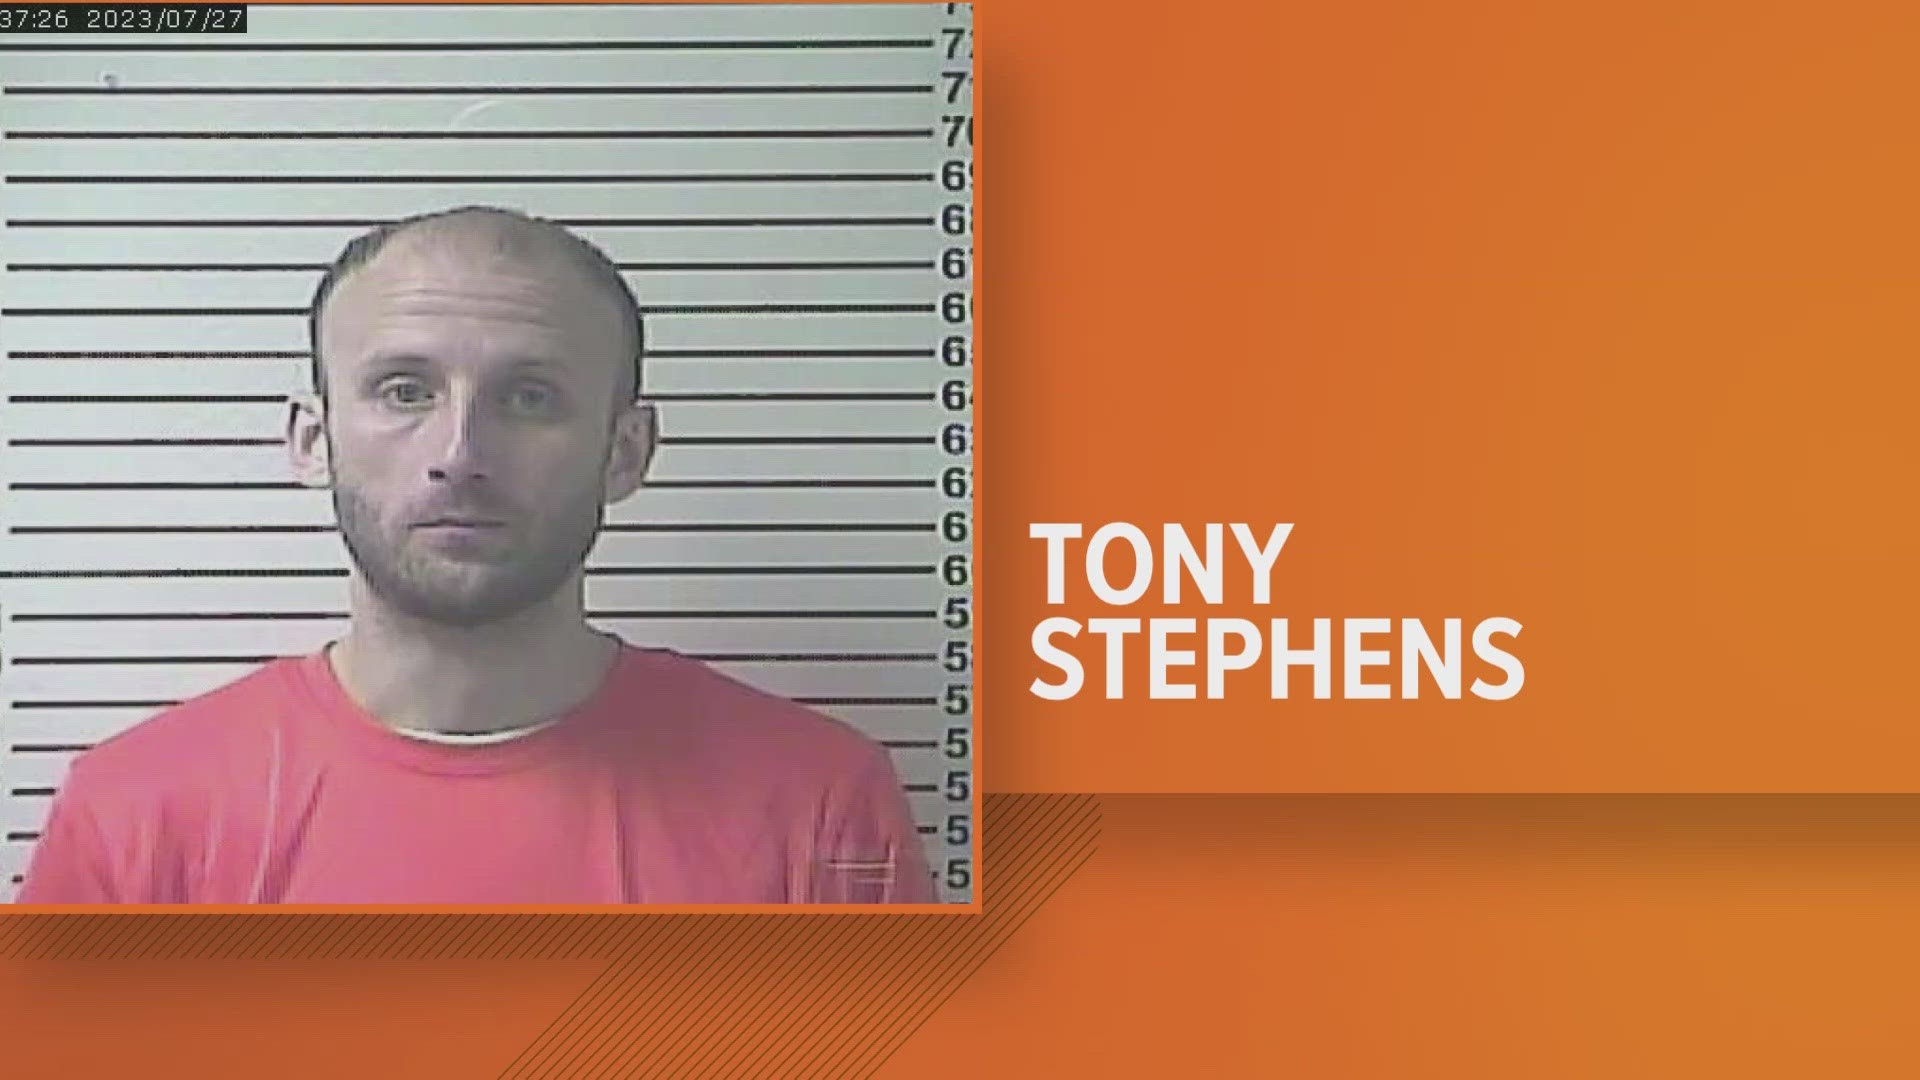 Tony R. Stephens, 37, escaped Tuesday morning. If you see him, do not approach him and call 911.